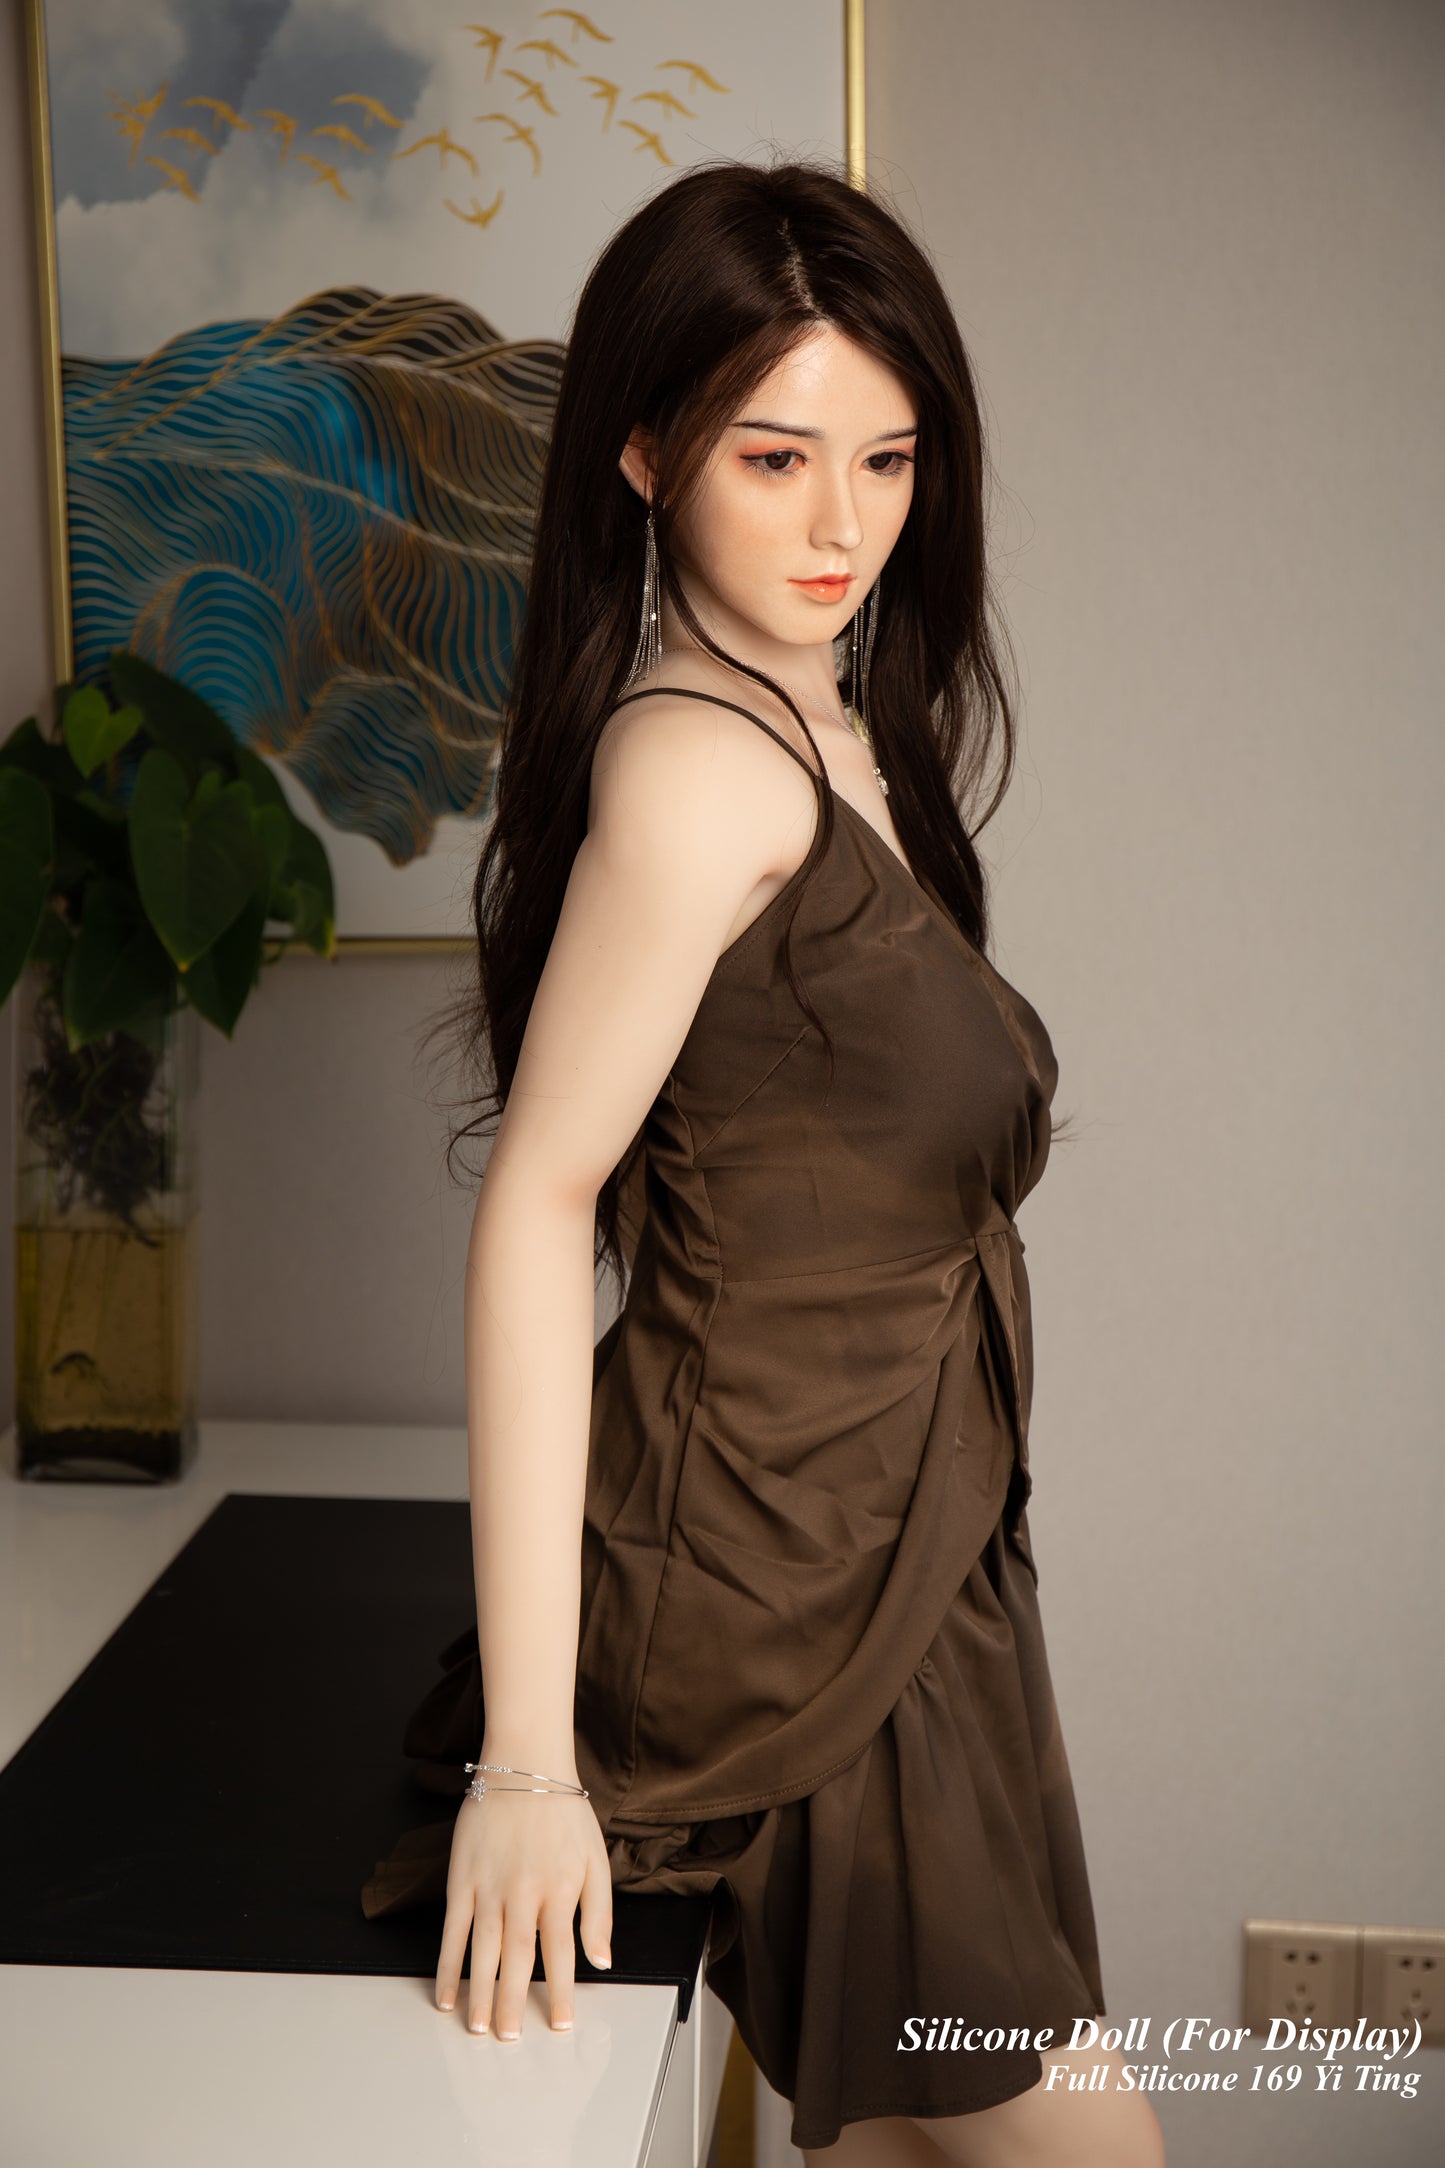 Mydoll Full Silicone Doll Life-like Fashion Display Mannequins For Display [ 169CM 依婷 ]